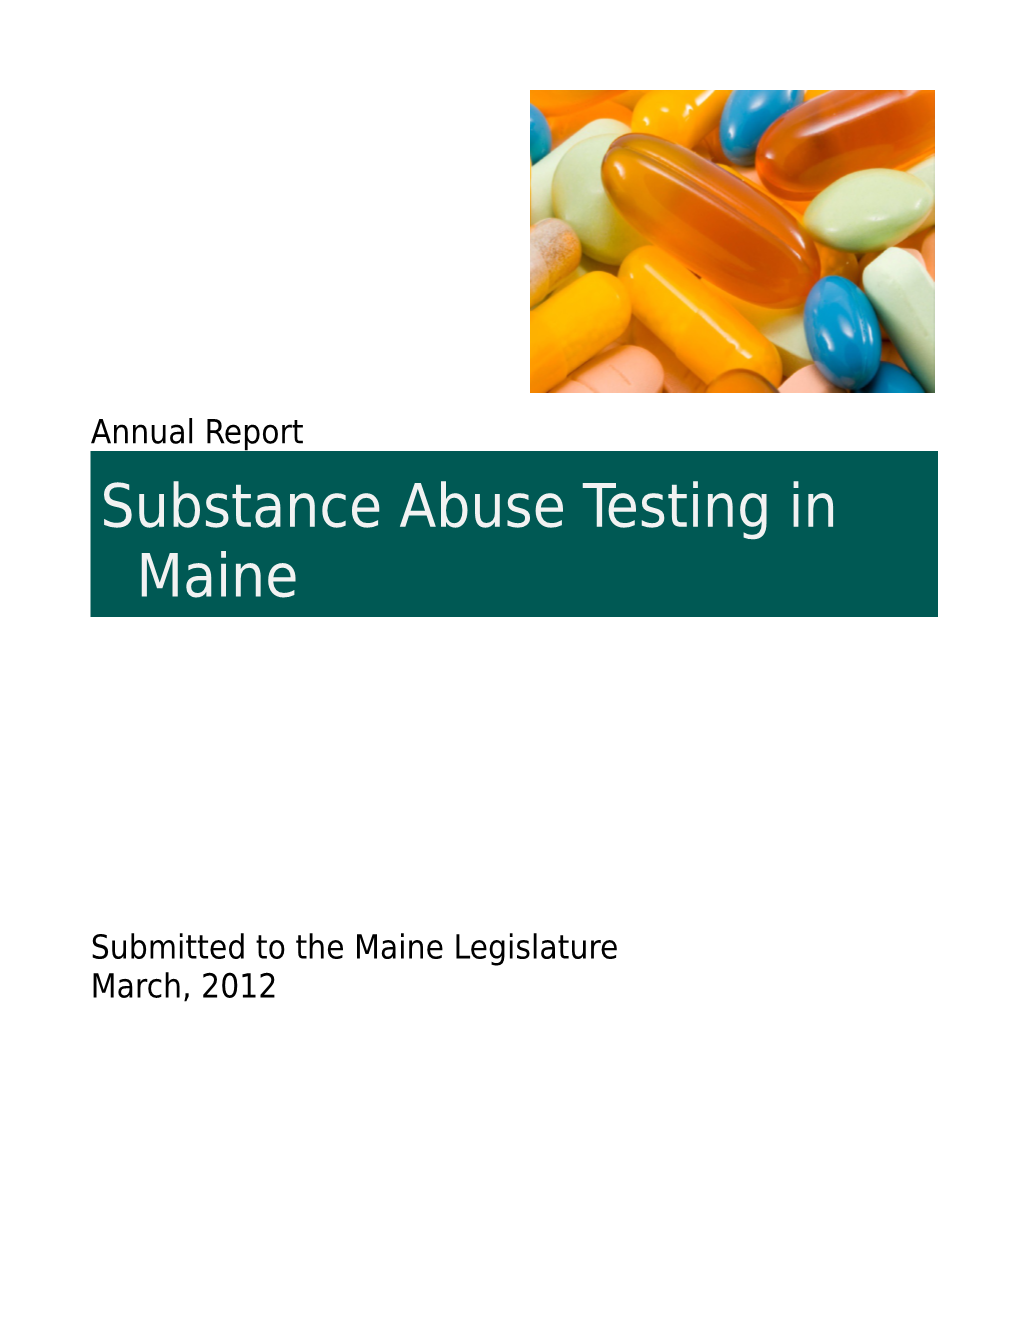 Substance Abuse Testing in Maine